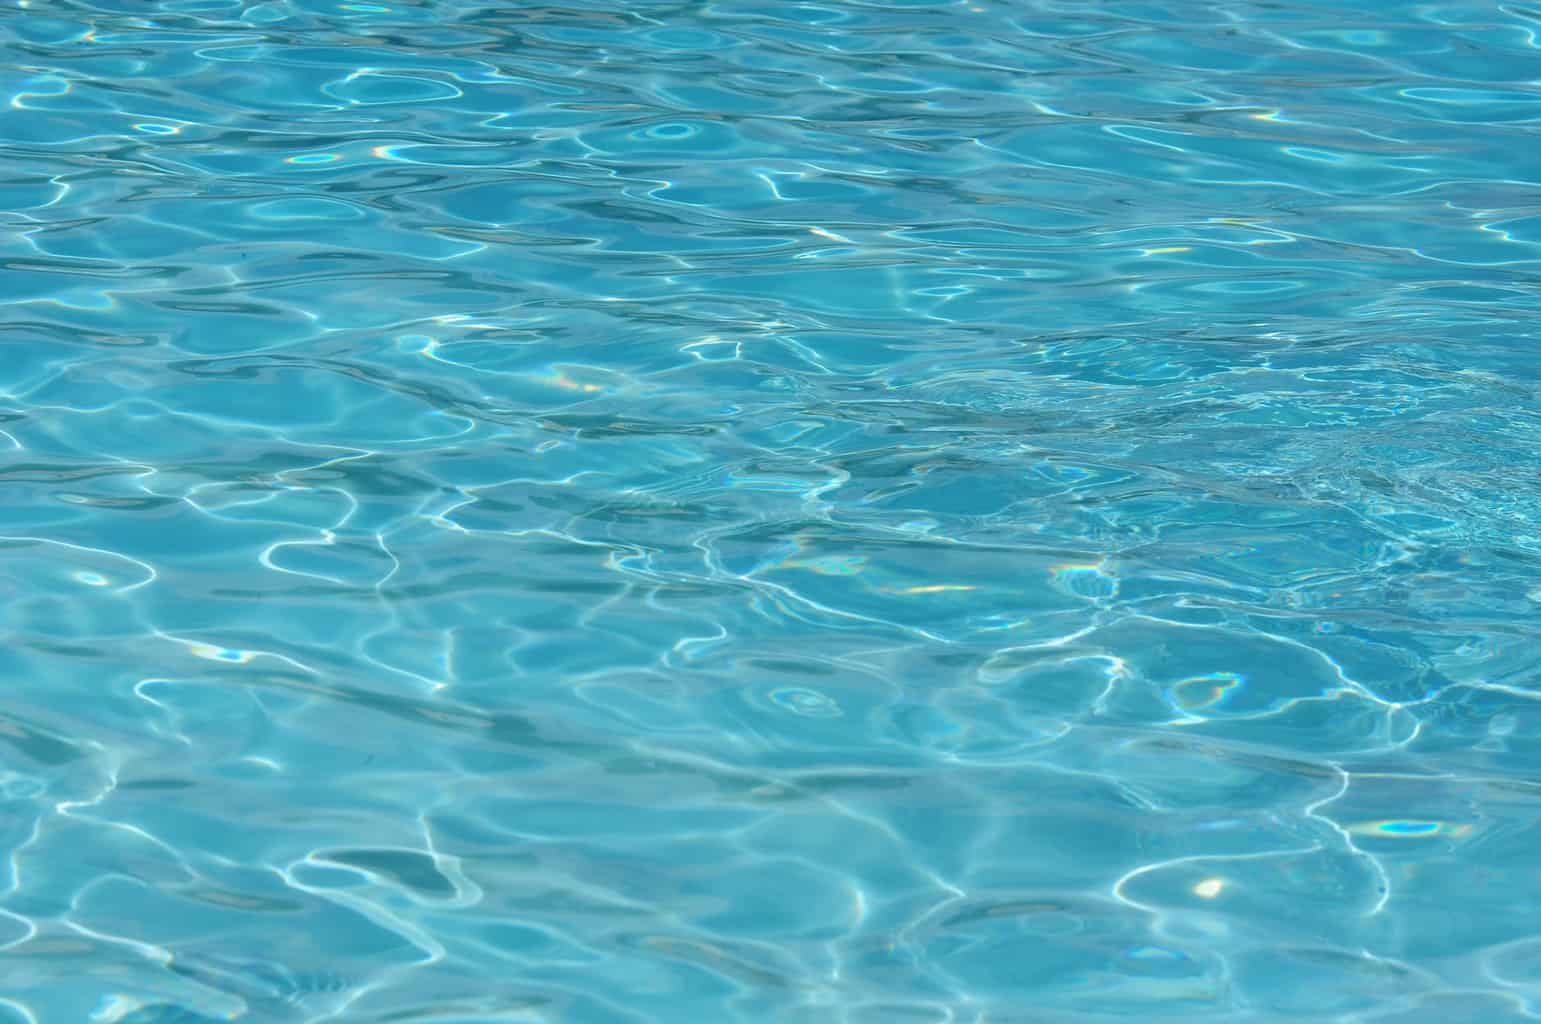 Prevent Drowning Accidents in Your Home